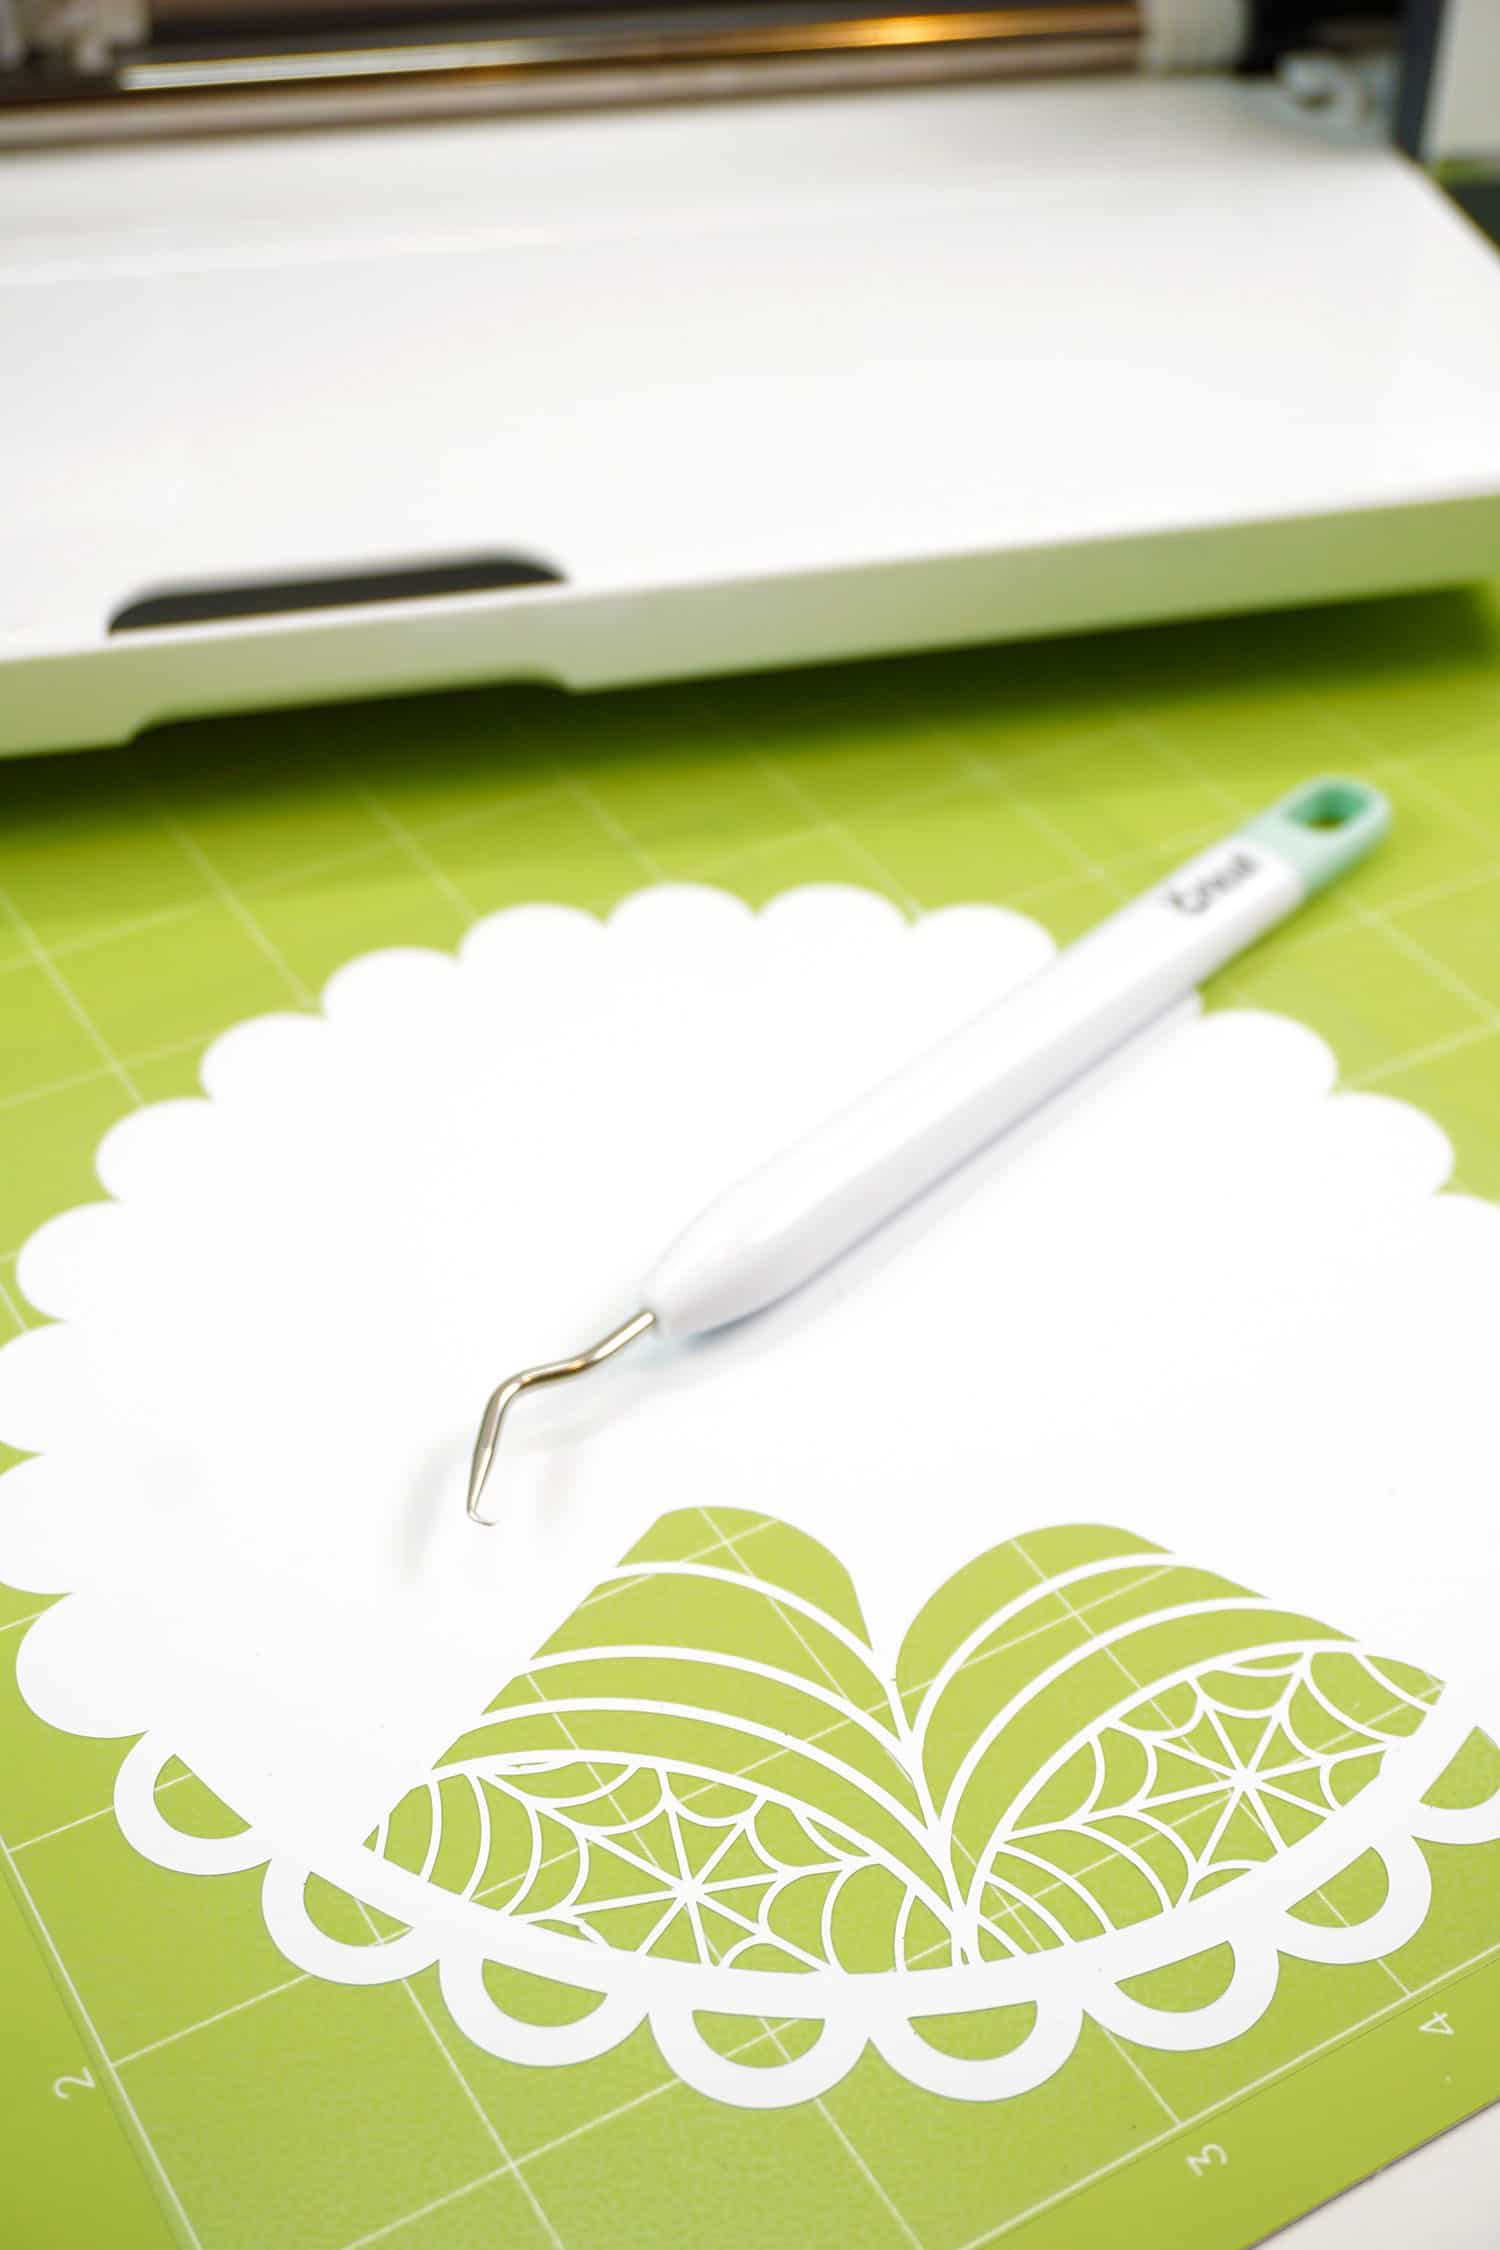 weeding tool and spider web design on cricut cutting mat